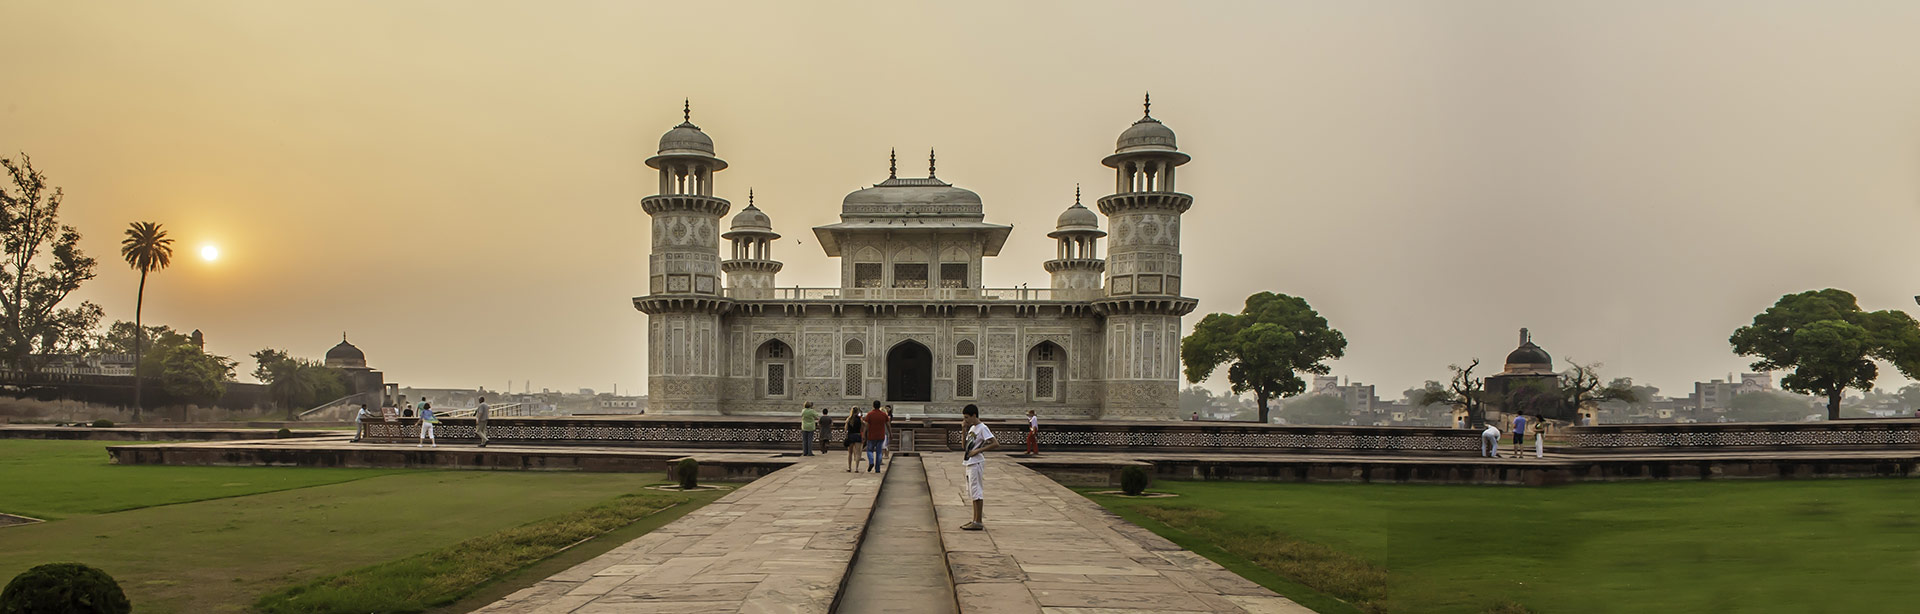 http://s6.picofile.com/file/8198034218/Breathtaking_Tombs_in_Agra.jpg